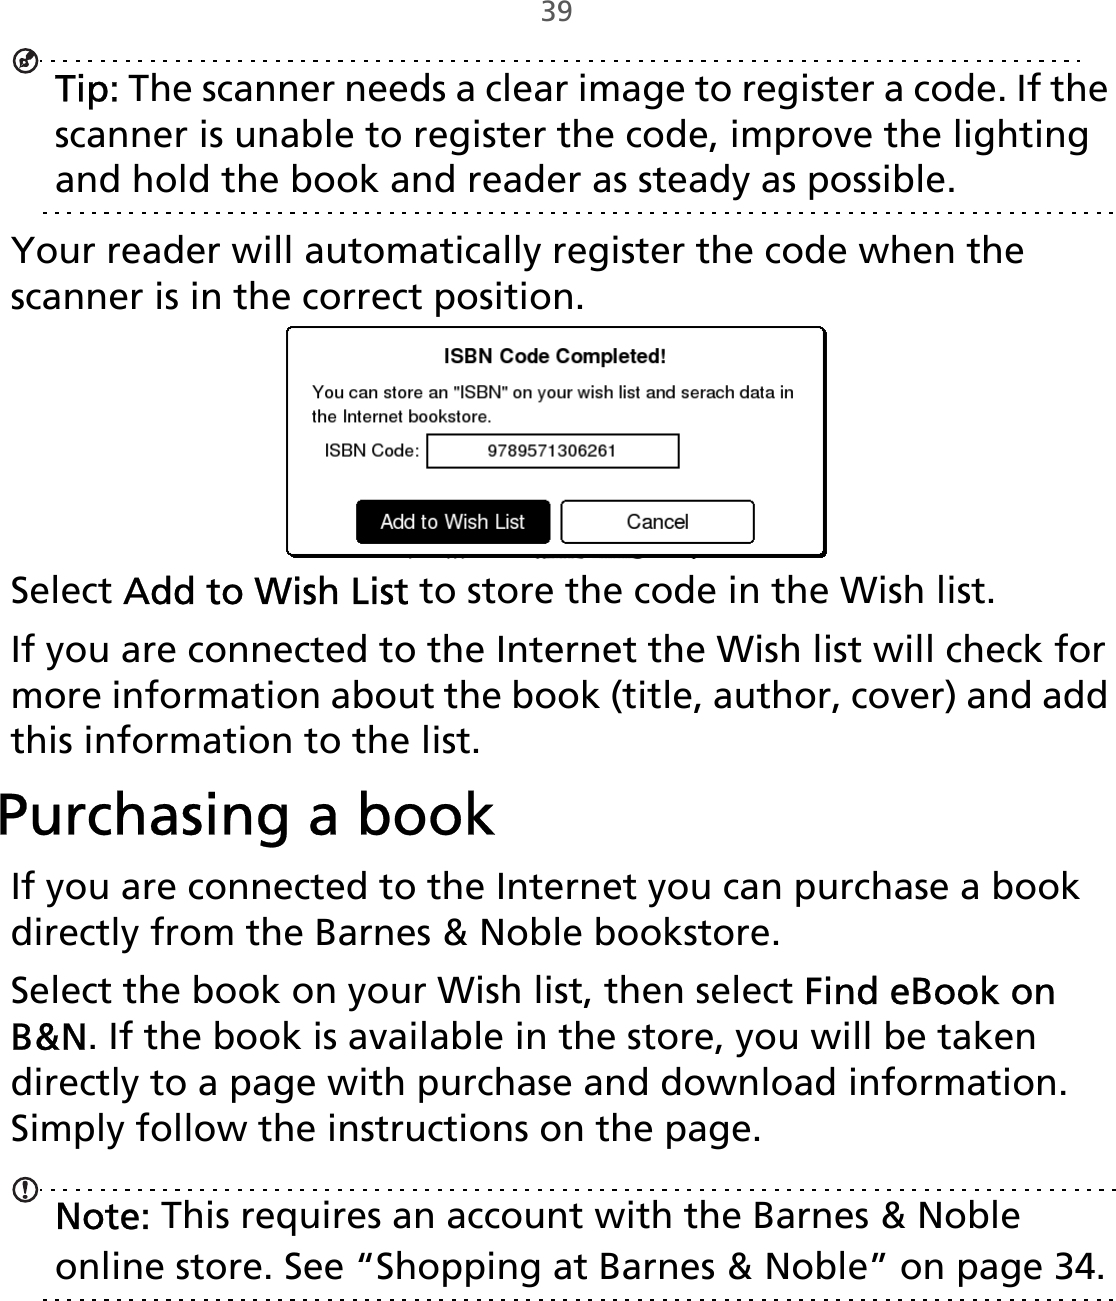 39Tip: The scanner needs a clear image to register a code. If the scanner is unable to register the code, improve the lighting and hold the book and reader as steady as possible. Your reader will automatically register the code when the scanner is in the correct position.Select Add to Wish List to store the code in the Wish list. If you are connected to the Internet the Wish list will check for more information about the book (title, author, cover) and add this information to the list. Purchasing a bookIf you are connected to the Internet you can purchase a book directly from the Barnes &amp; Noble bookstore. Select the book on your Wish list, then select Find eBook on B&amp;N. If the book is available in the store, you will be taken directly to a page with purchase and download information. Simply follow the instructions on the page.Note: This requires an account with the Barnes &amp; Noble online store. See “Shopping at Barnes󵛑&amp;󵛑Noble” on page 34.